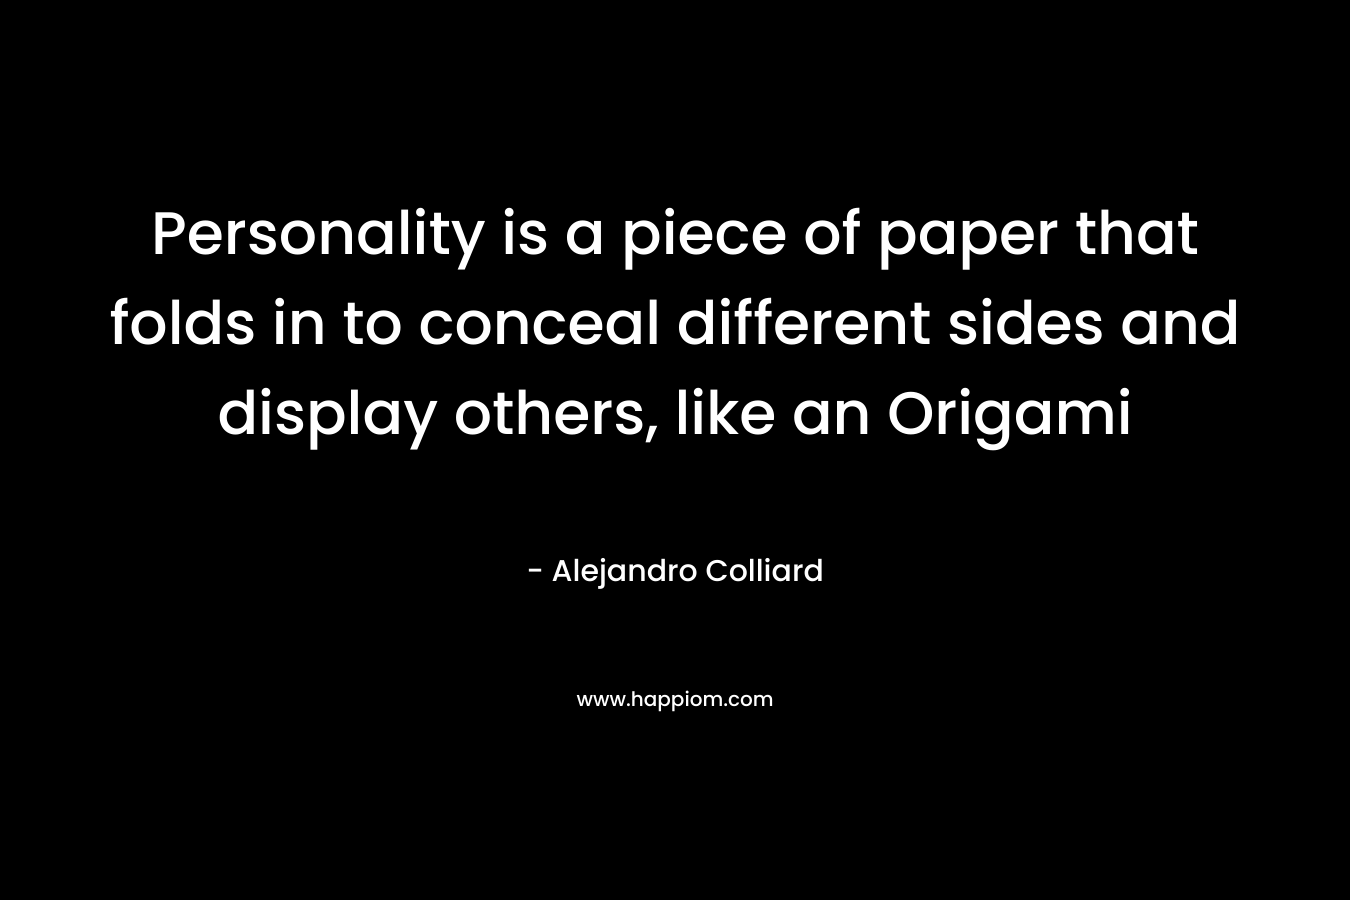 Personality is a piece of paper that folds in to conceal different sides and display others, like an Origami – Alejandro Colliard